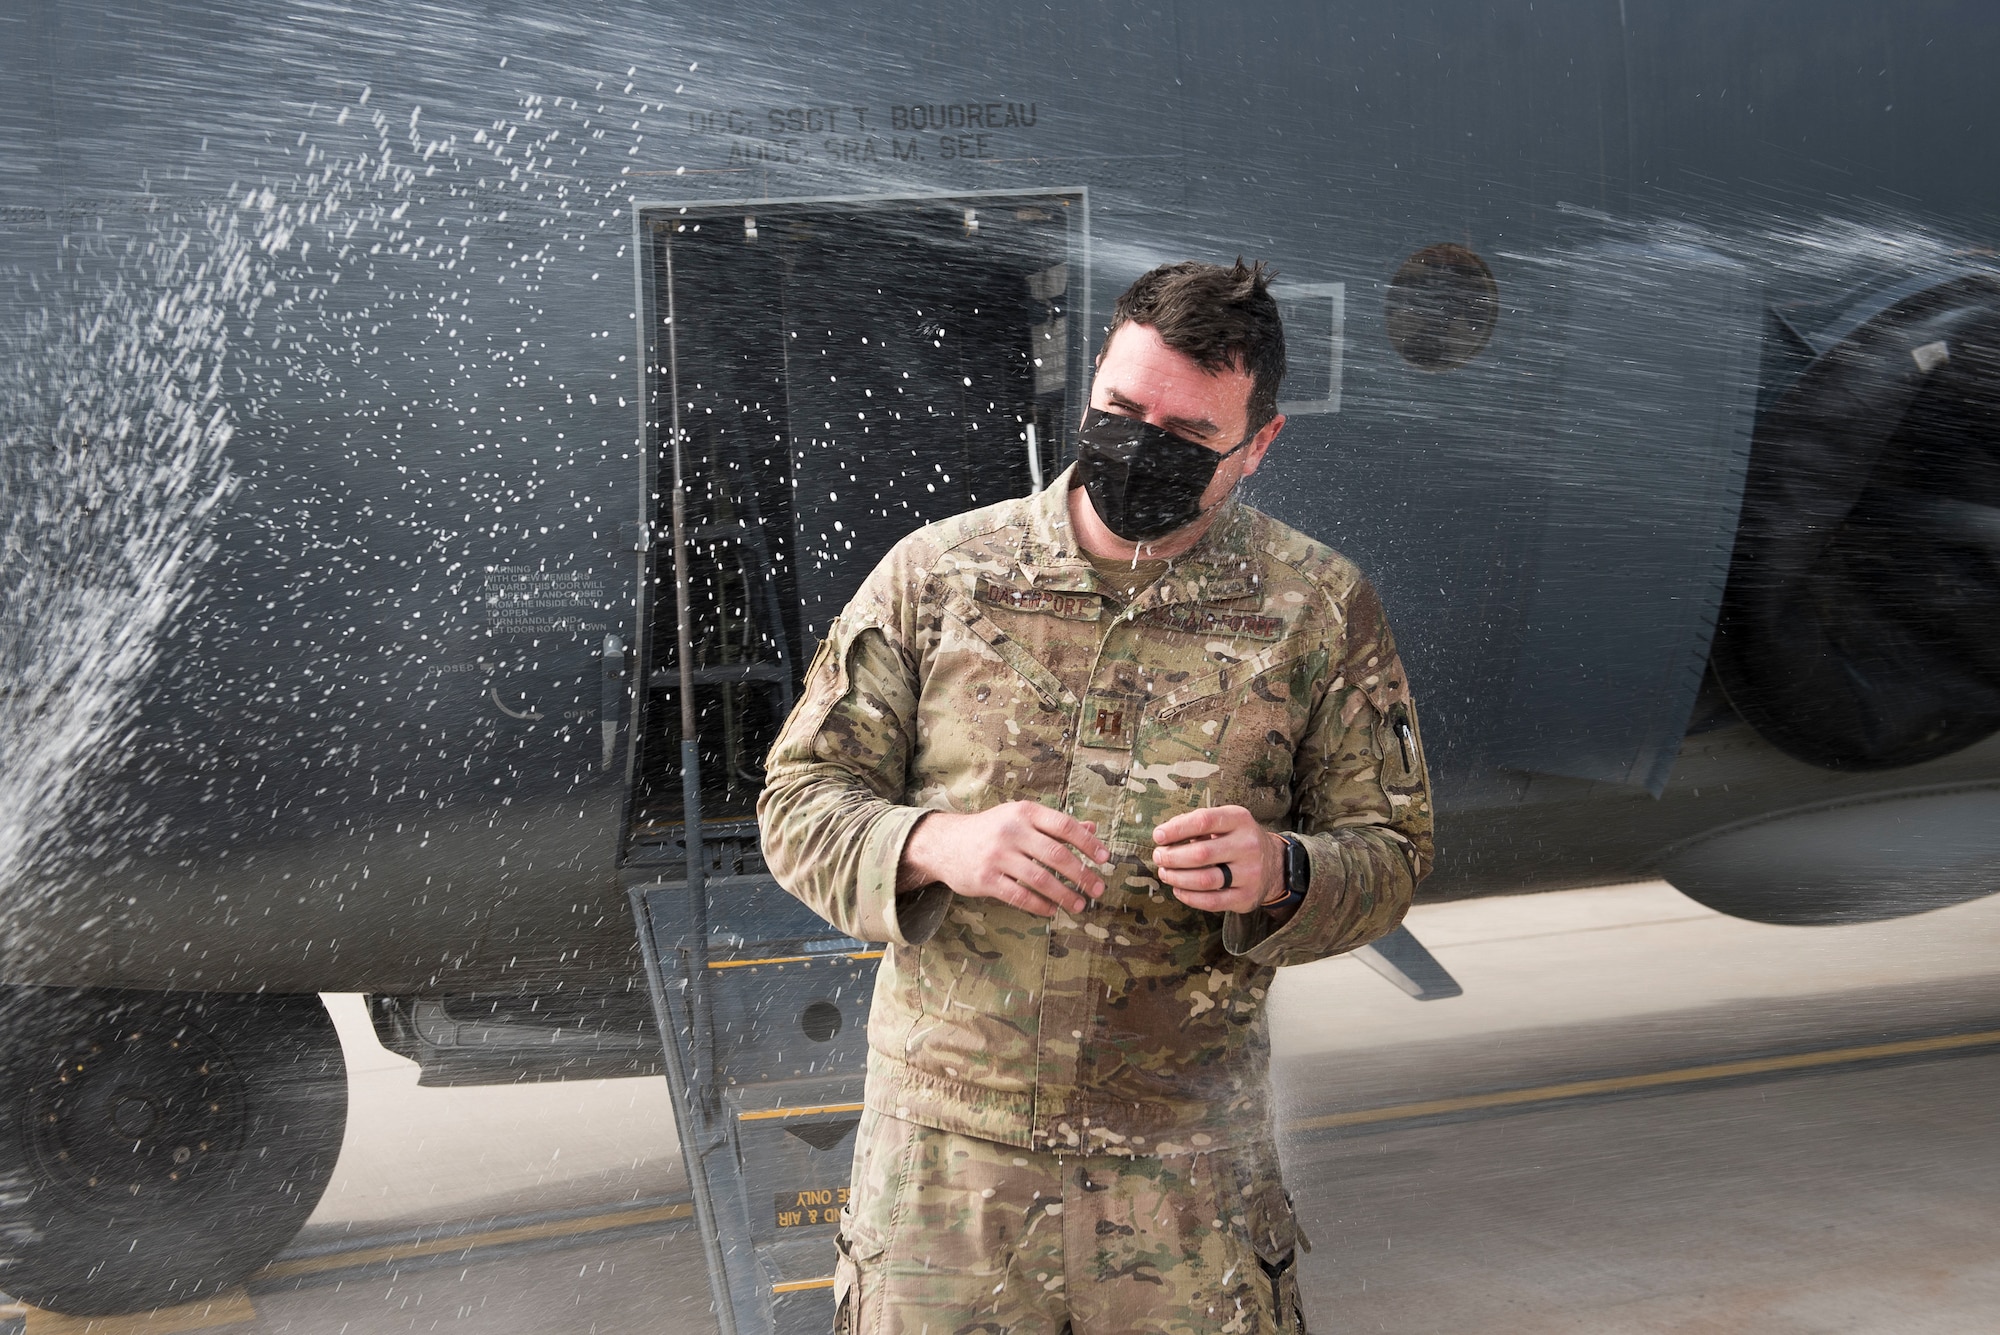 Capt. Tyler Davenport, 551st Special Operations chief of safety, gets sprayed after a fini flight at Cannon Air Force Base, N.M., April 29, 2021. The flight was flown to commemorate the phasing out of the 551 SOS. (U.S. Air Force photo by Senior Airman Vernon R. Walter III)